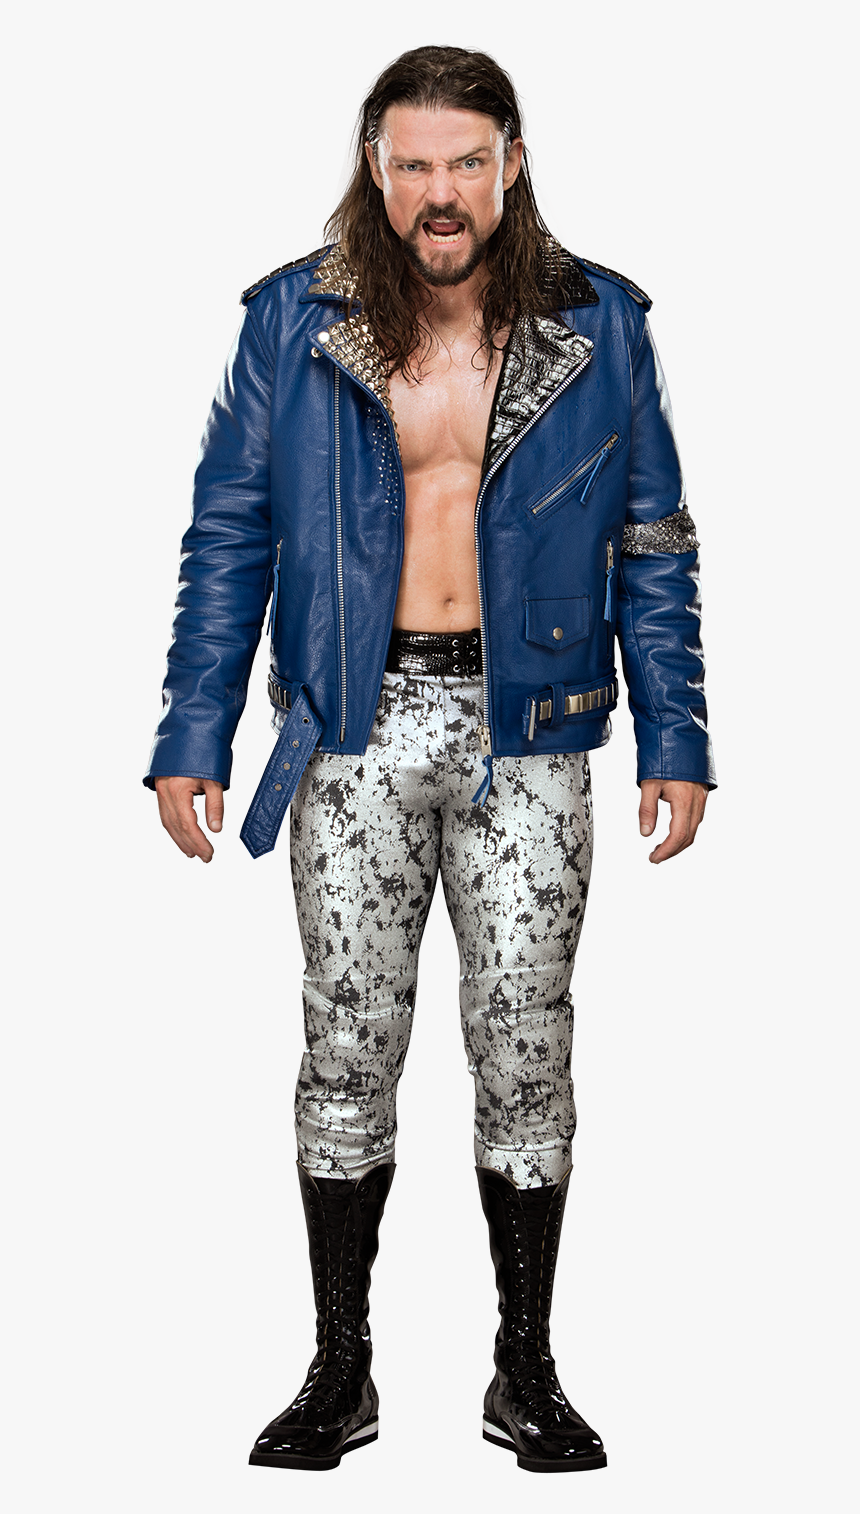 Brian Kendrick Wearing Blue Jacket - Jack Gallagher And Brian Kendrick, HD Png Download, Free Download